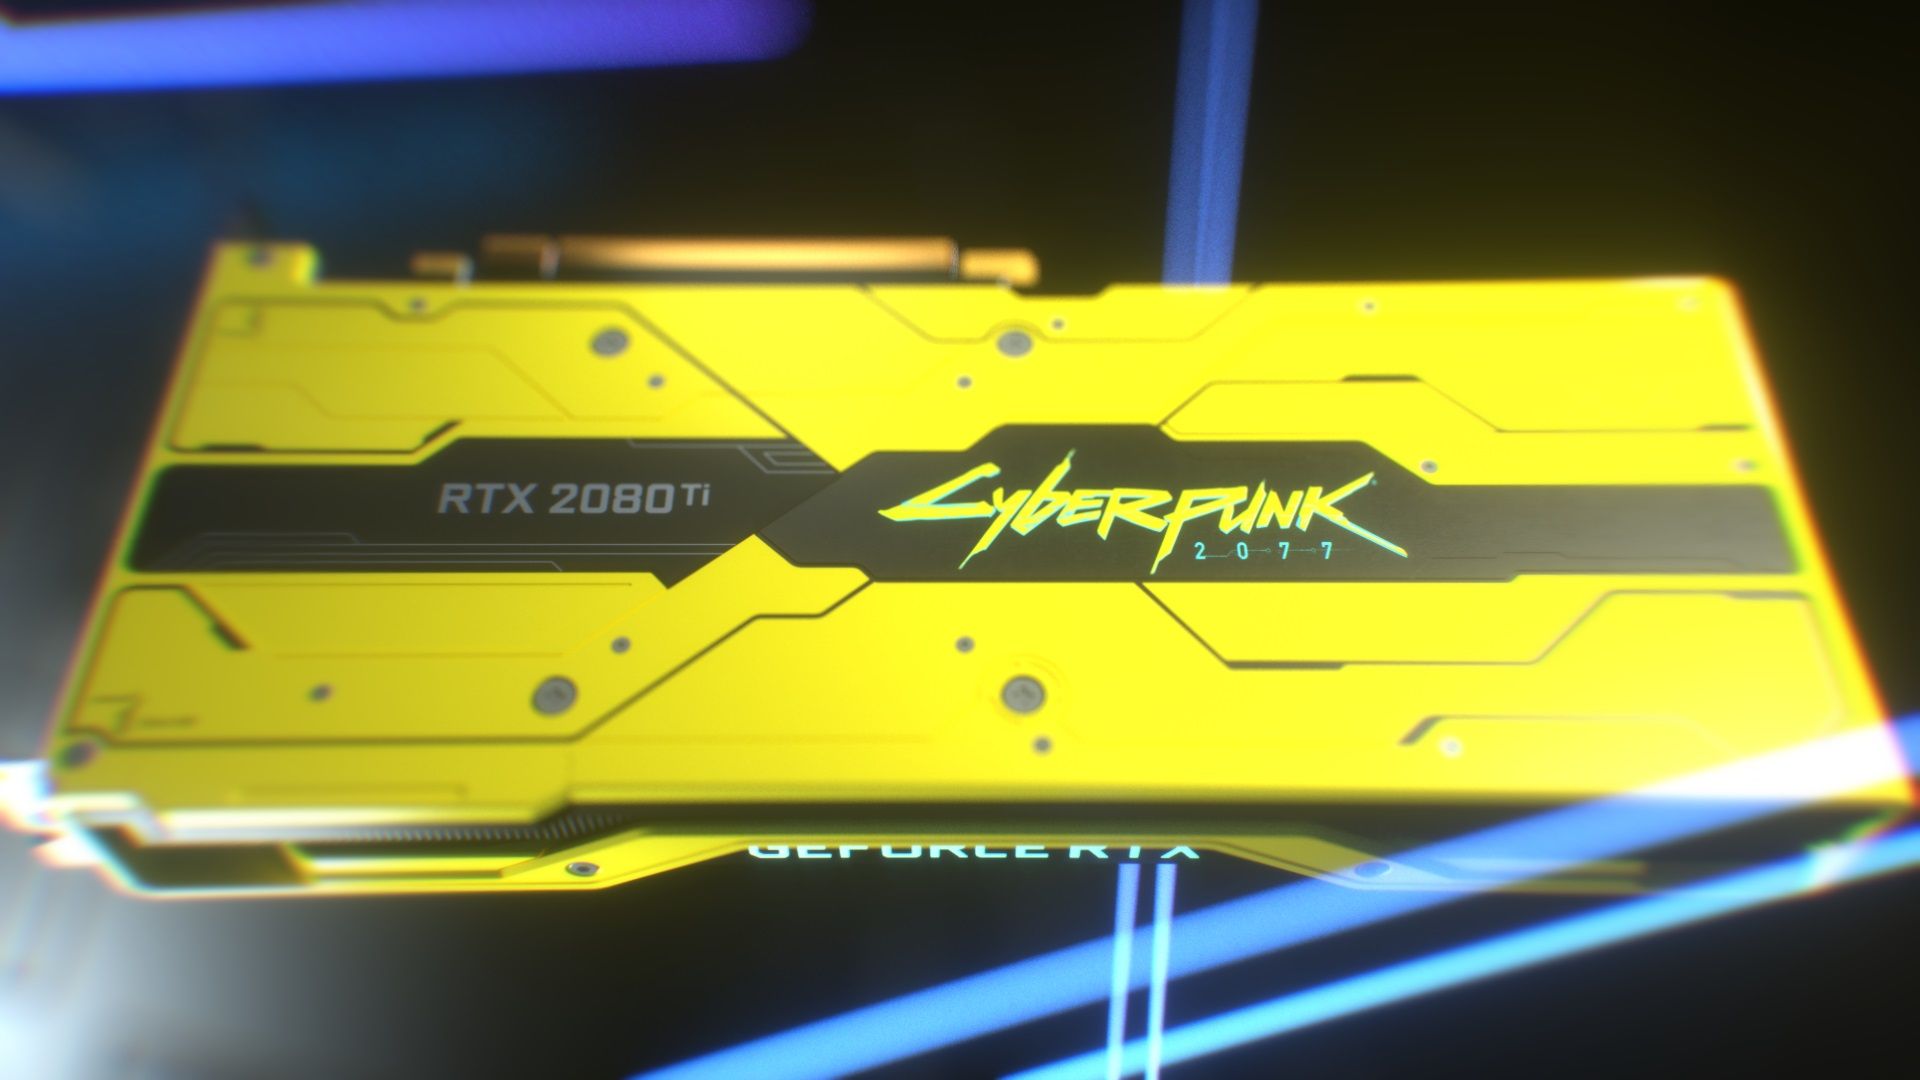 Nvidia is showing off a Cyberpunk 2077 Edition RTX 2080 Ti you cant buy image 1